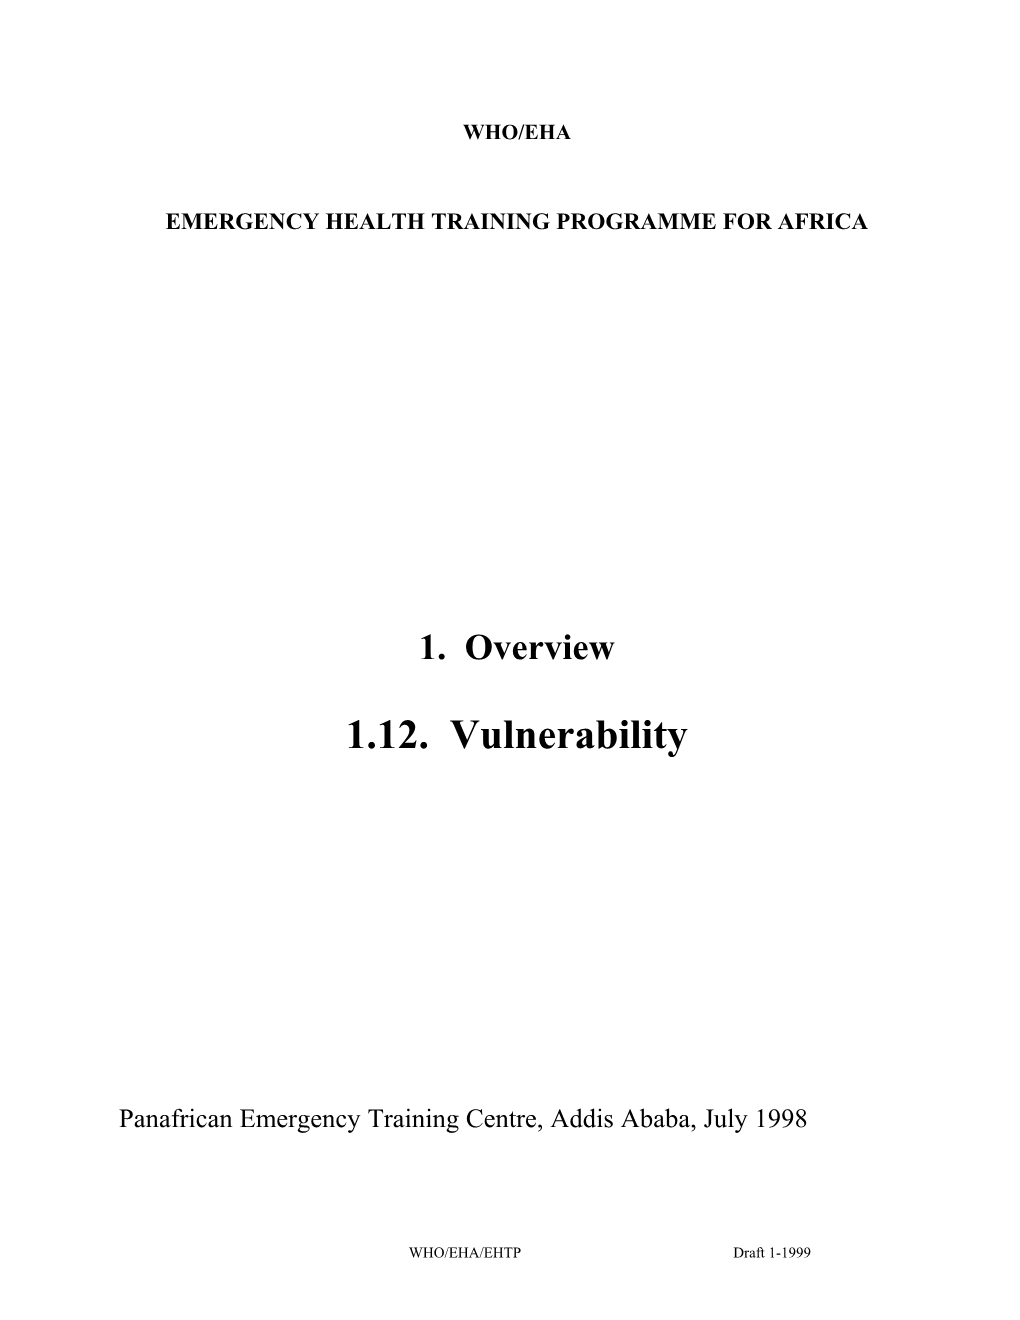 Emergency Health Training Programme for Africa